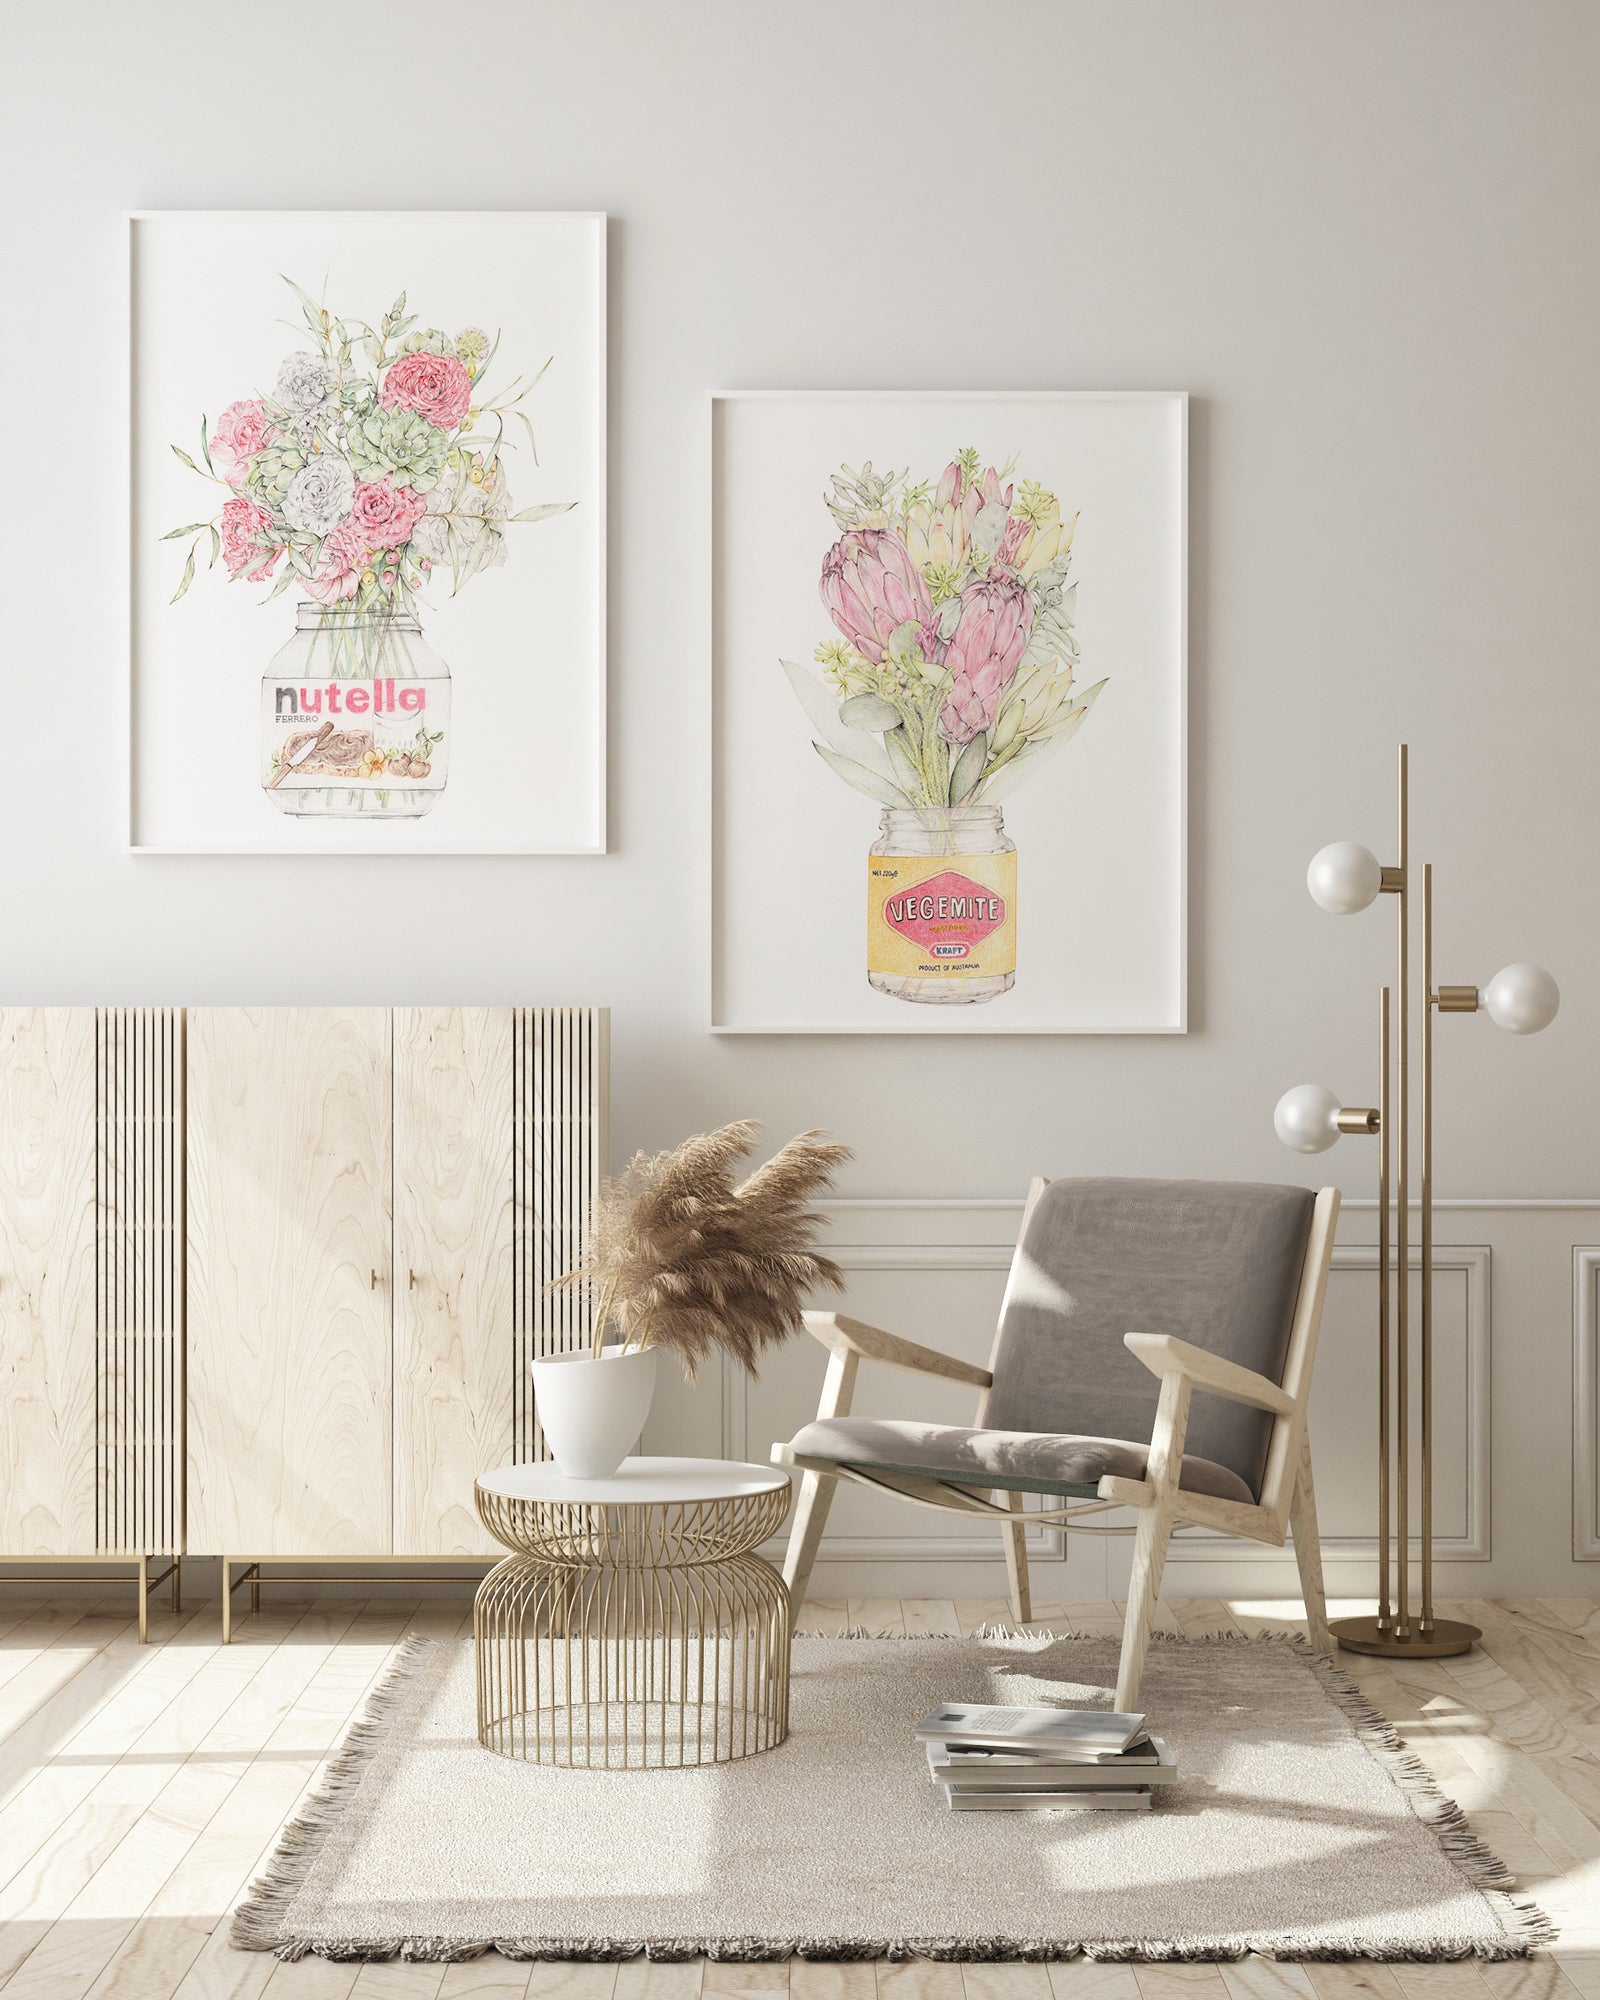 Contemporary botanical art prints featuring Nutella and Vegemite